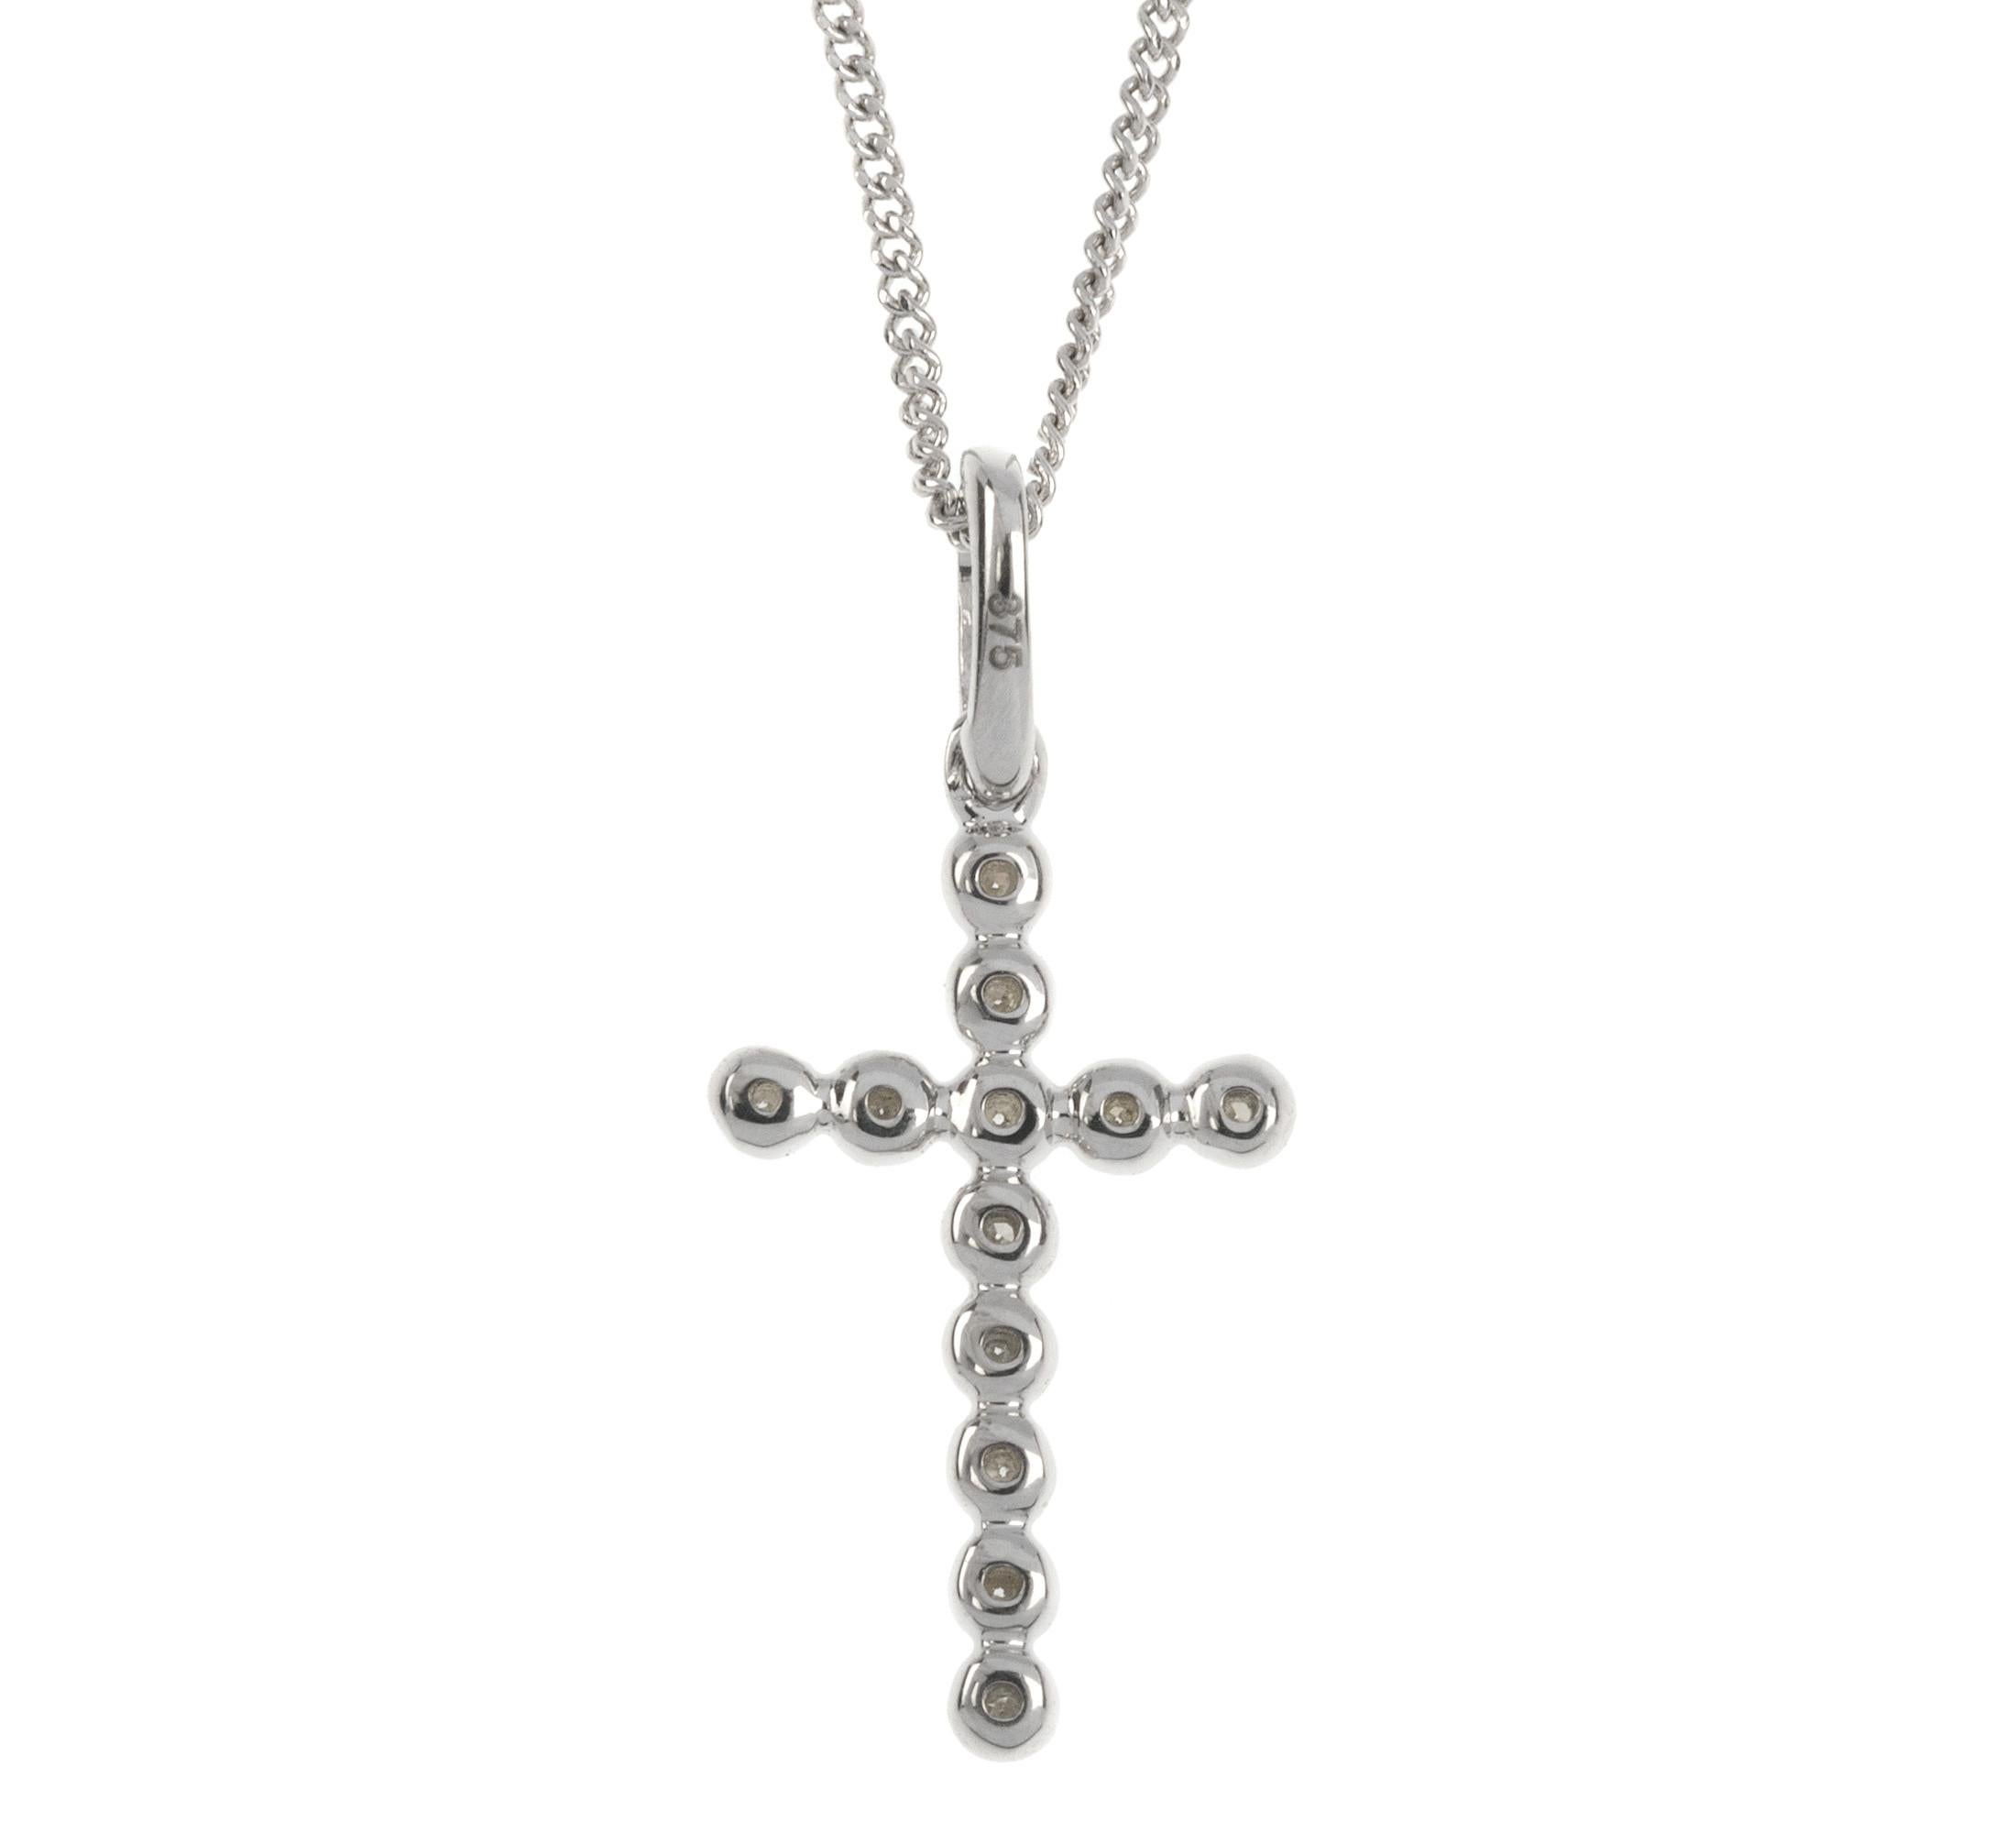 A simple and pretty white gold cross pendant set with a sprinkling of sparkling diamonds. Suspended from an 18